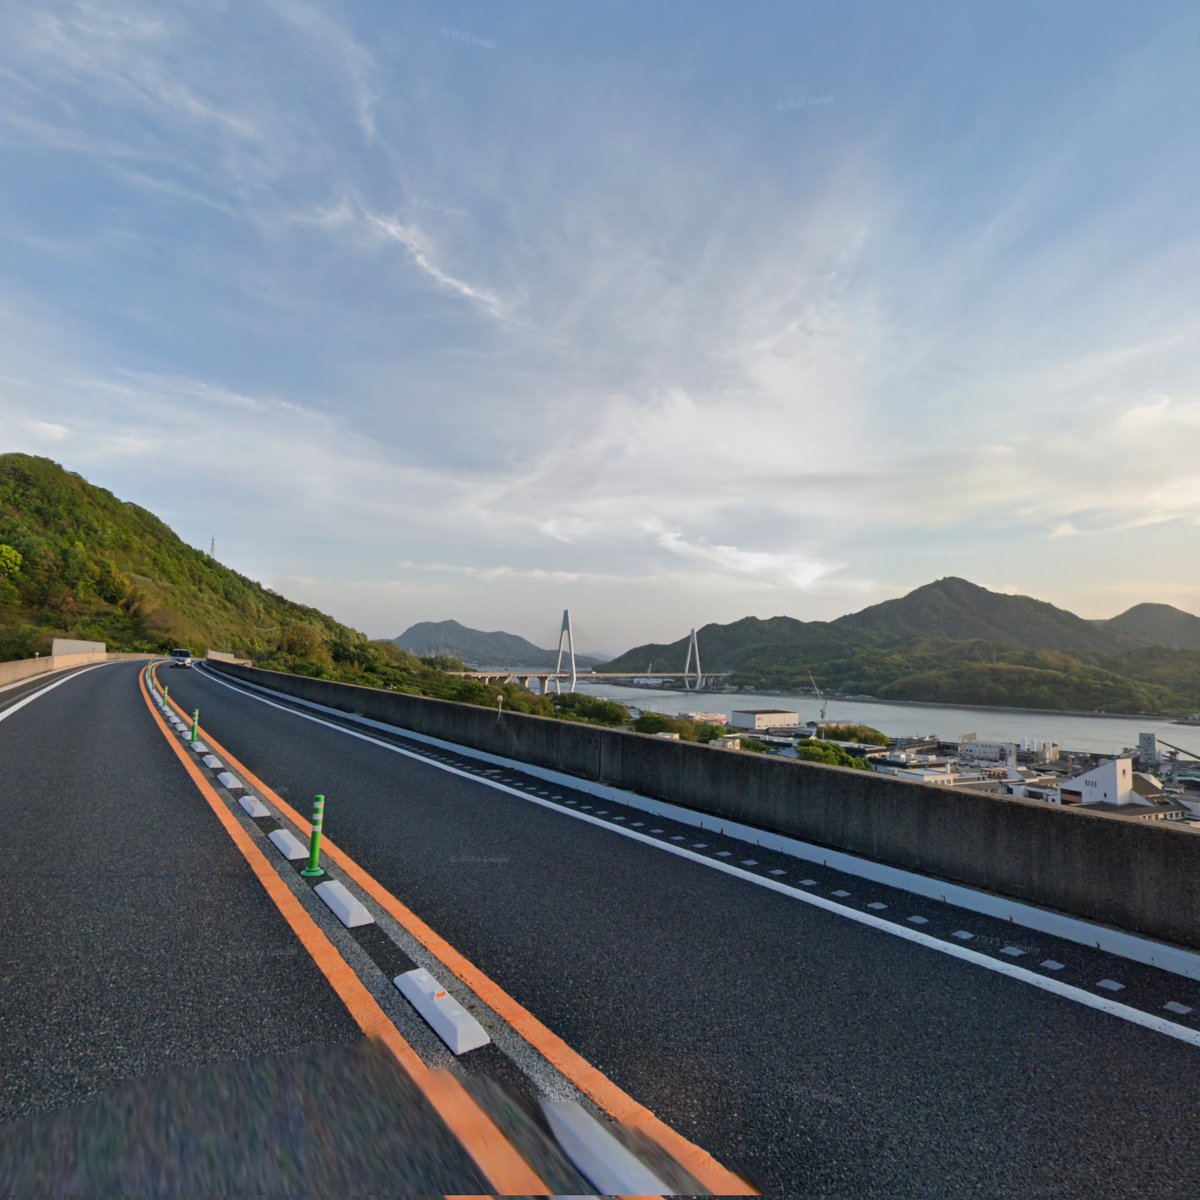 Had to stop on this bridge and admire the view with the sunrise on this mornings bike ride around Japan. Unfortunately, it was only in VR, I need to go in real life one day. @VirZOOM #VZfit #VR #Japan